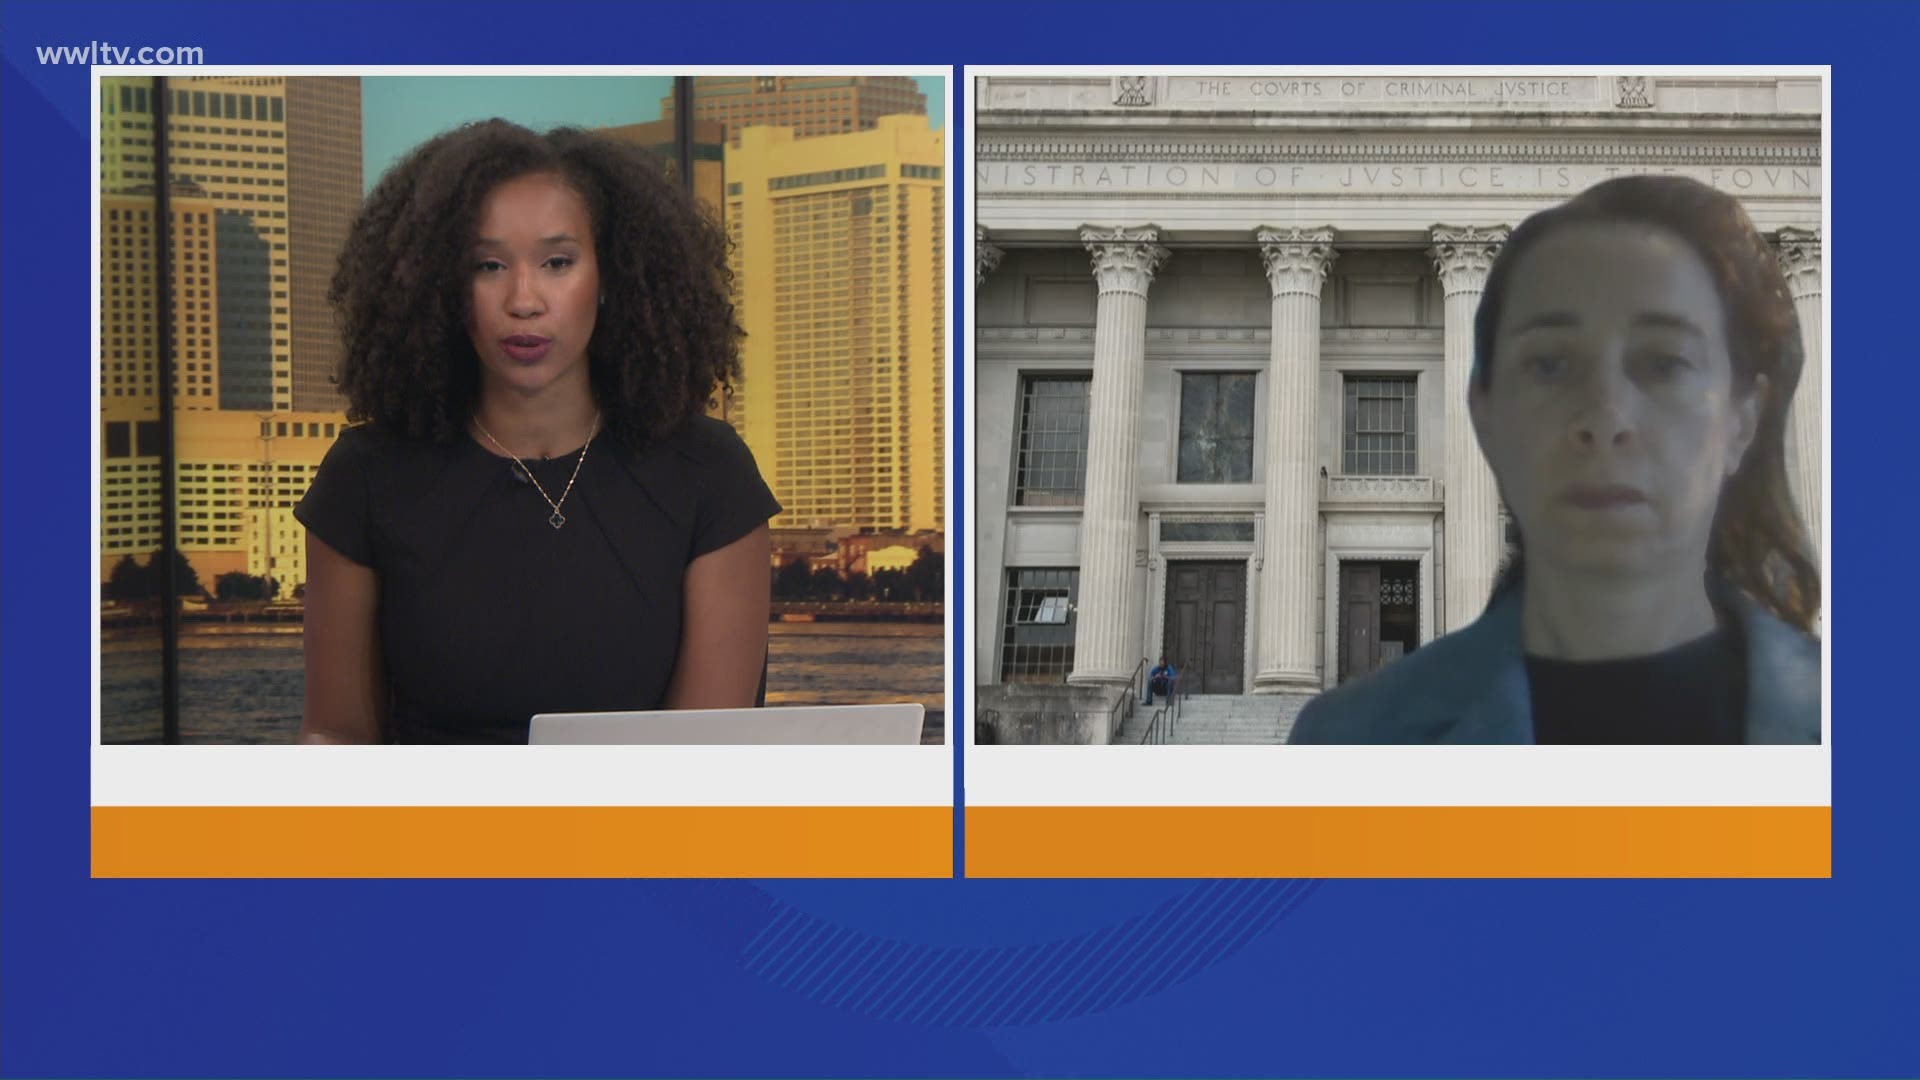 Simone Levine, Executive Director of Court Watch NOLA, explains what they found in their latest annual report, including the city's rate of denied domestic charges.